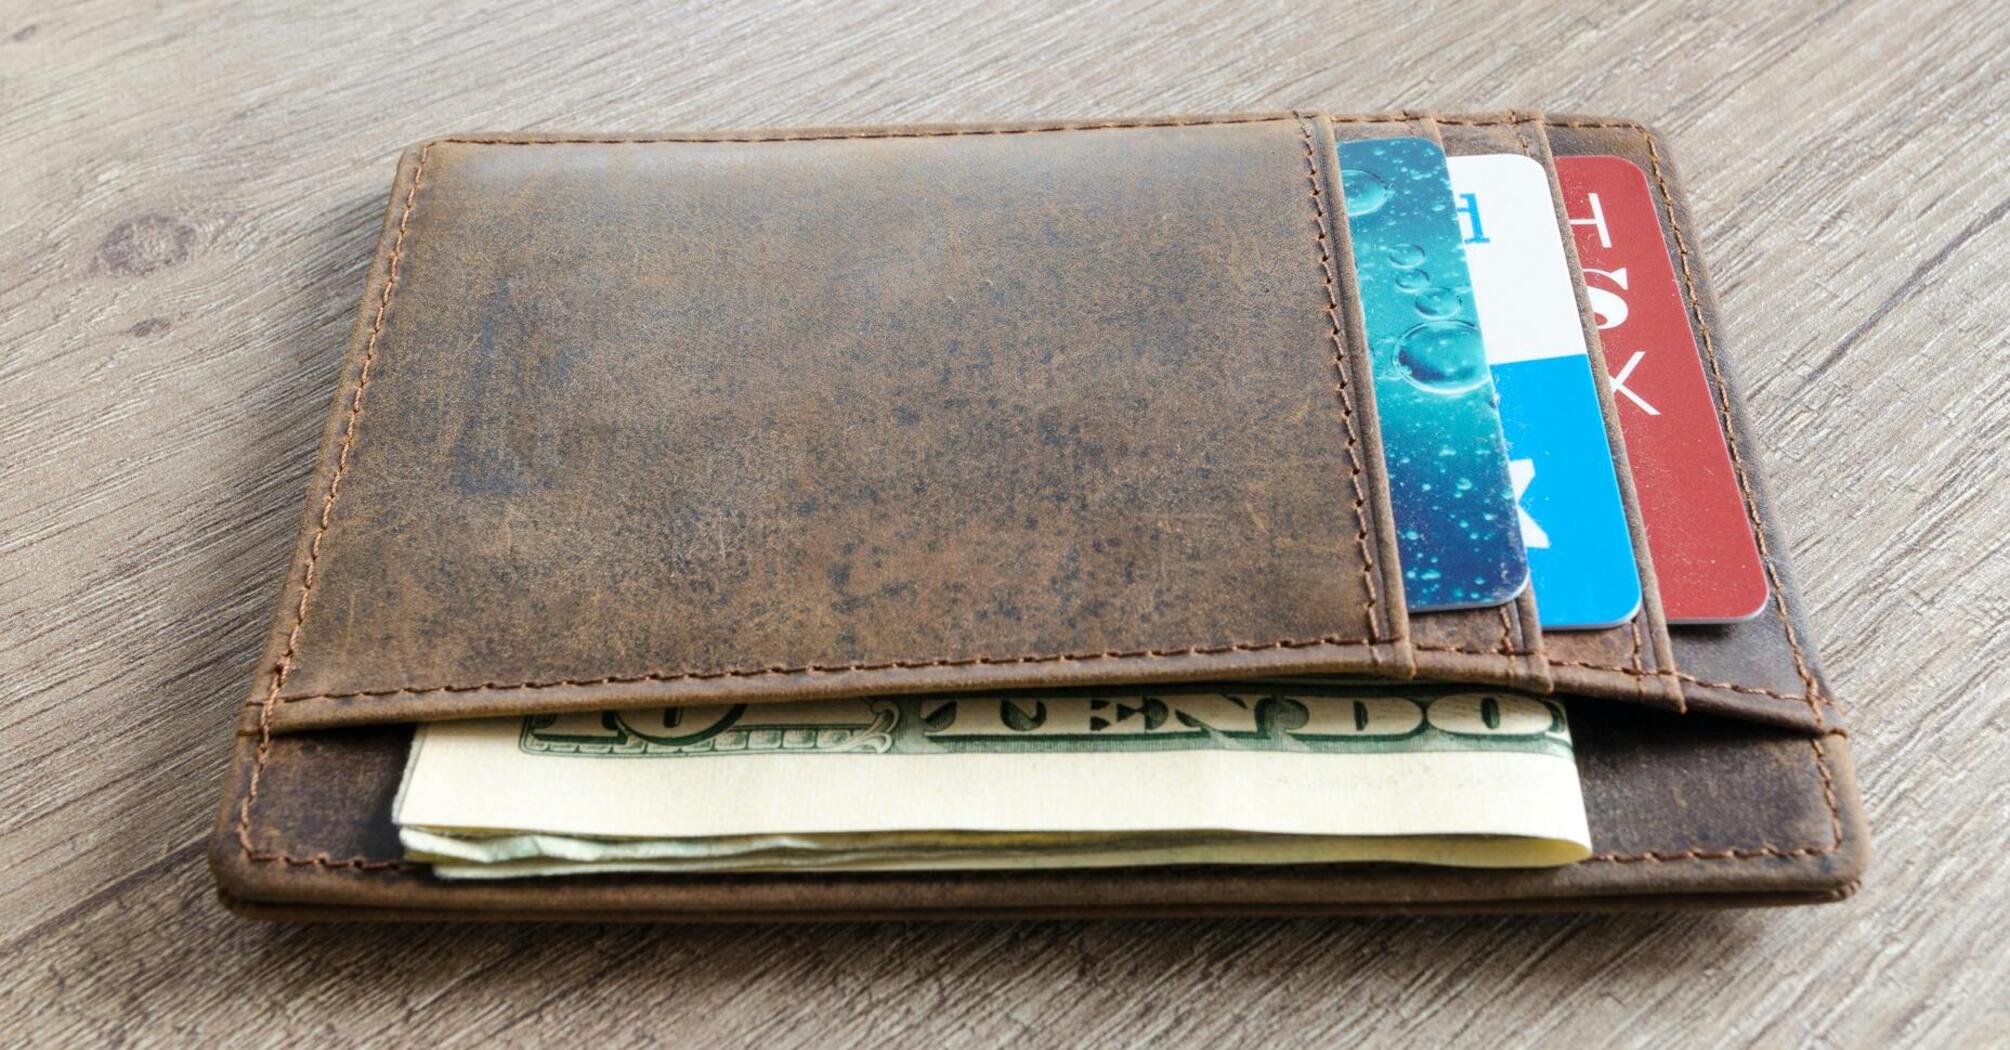  5 things that should not be kept in a wallet have been named